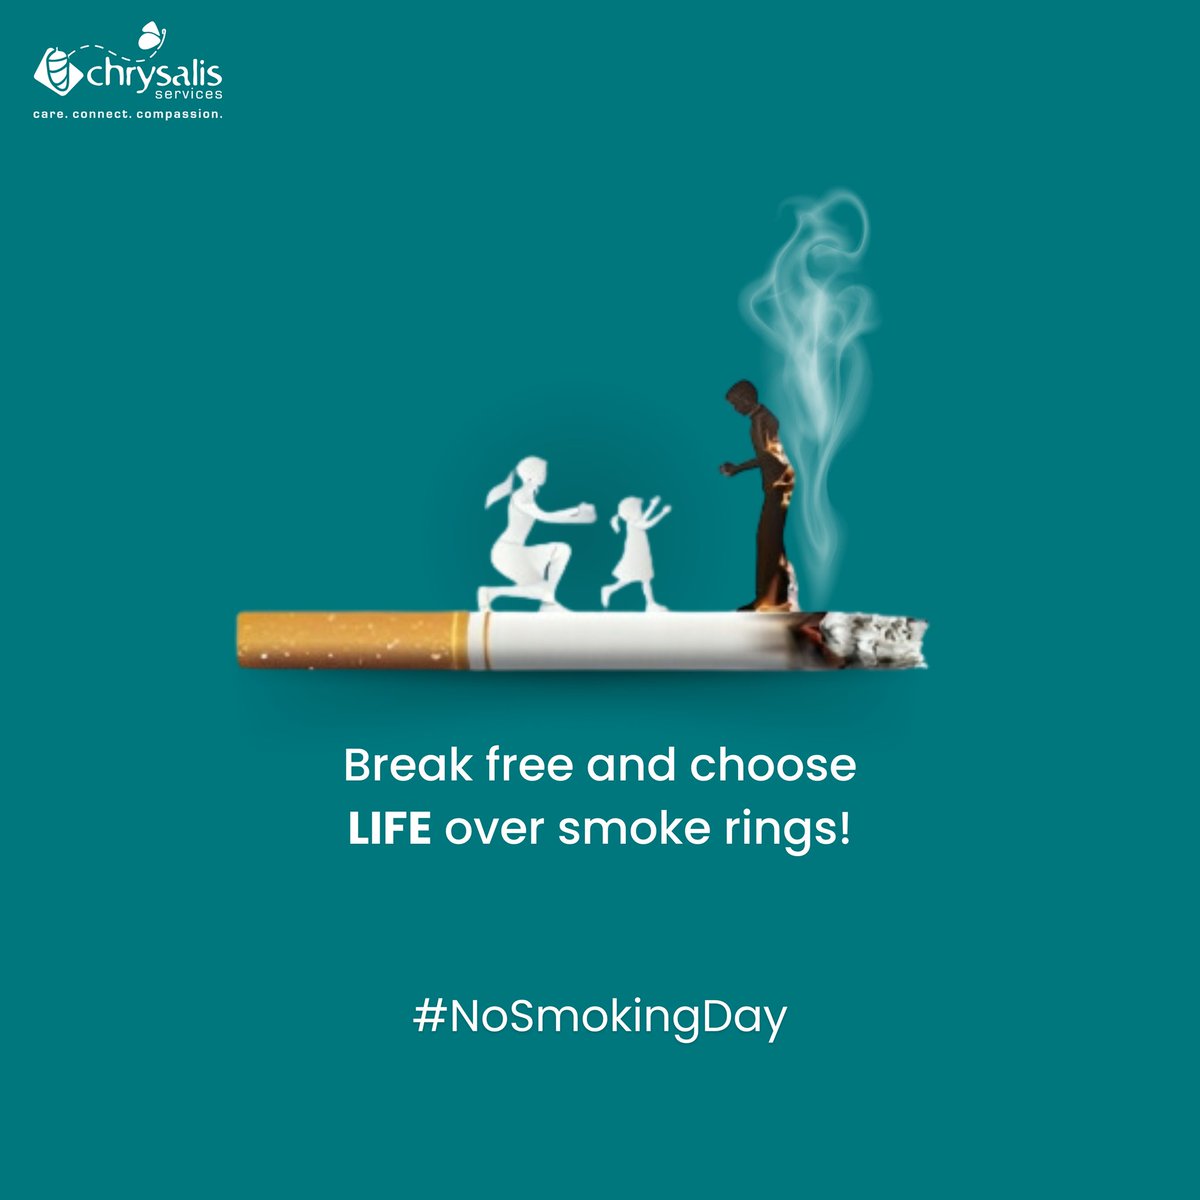 Celebrate #NoSmokingDay by breaking free from the chains of smoke and welcoming a world brimming with laughter and life! Opt for health, opt for happiness. Embrace a smoke-free future, radiating with brightness and contagious joy.

#NoSmokingDay #ChooseHealth #SmokeFreeSmiles